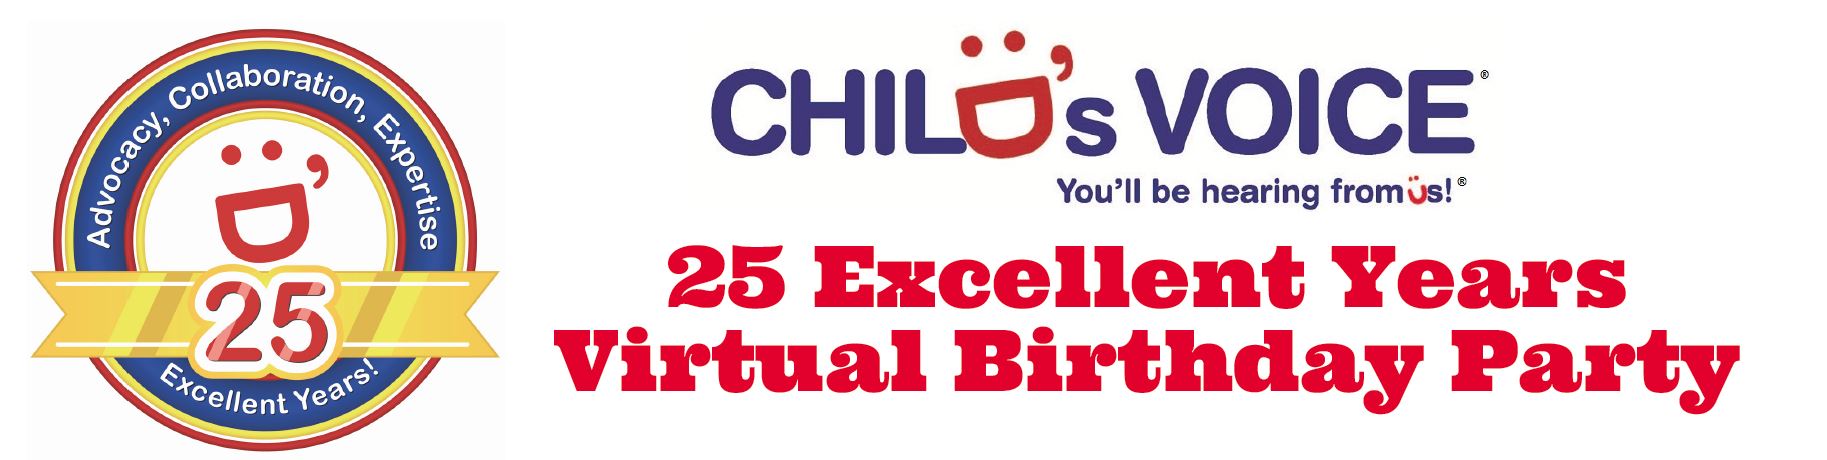 Child's Voice 25 Excellent Years Birthday Party